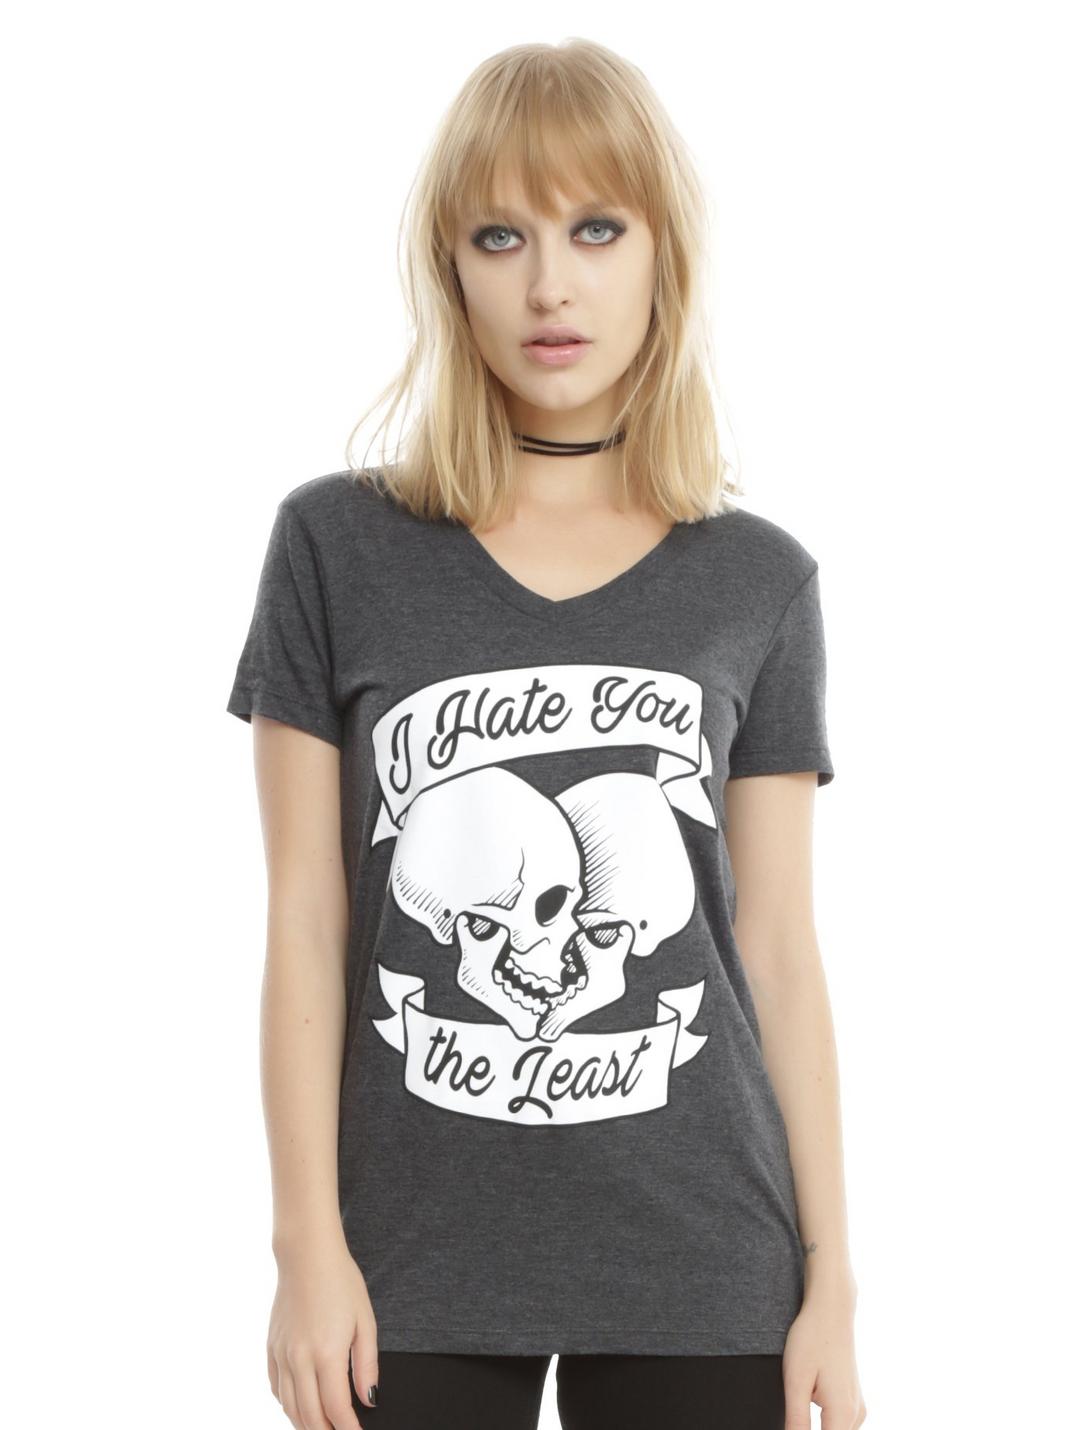 Plus Size I Hate You The Least Girls T-Shirt, GREY, hi-res